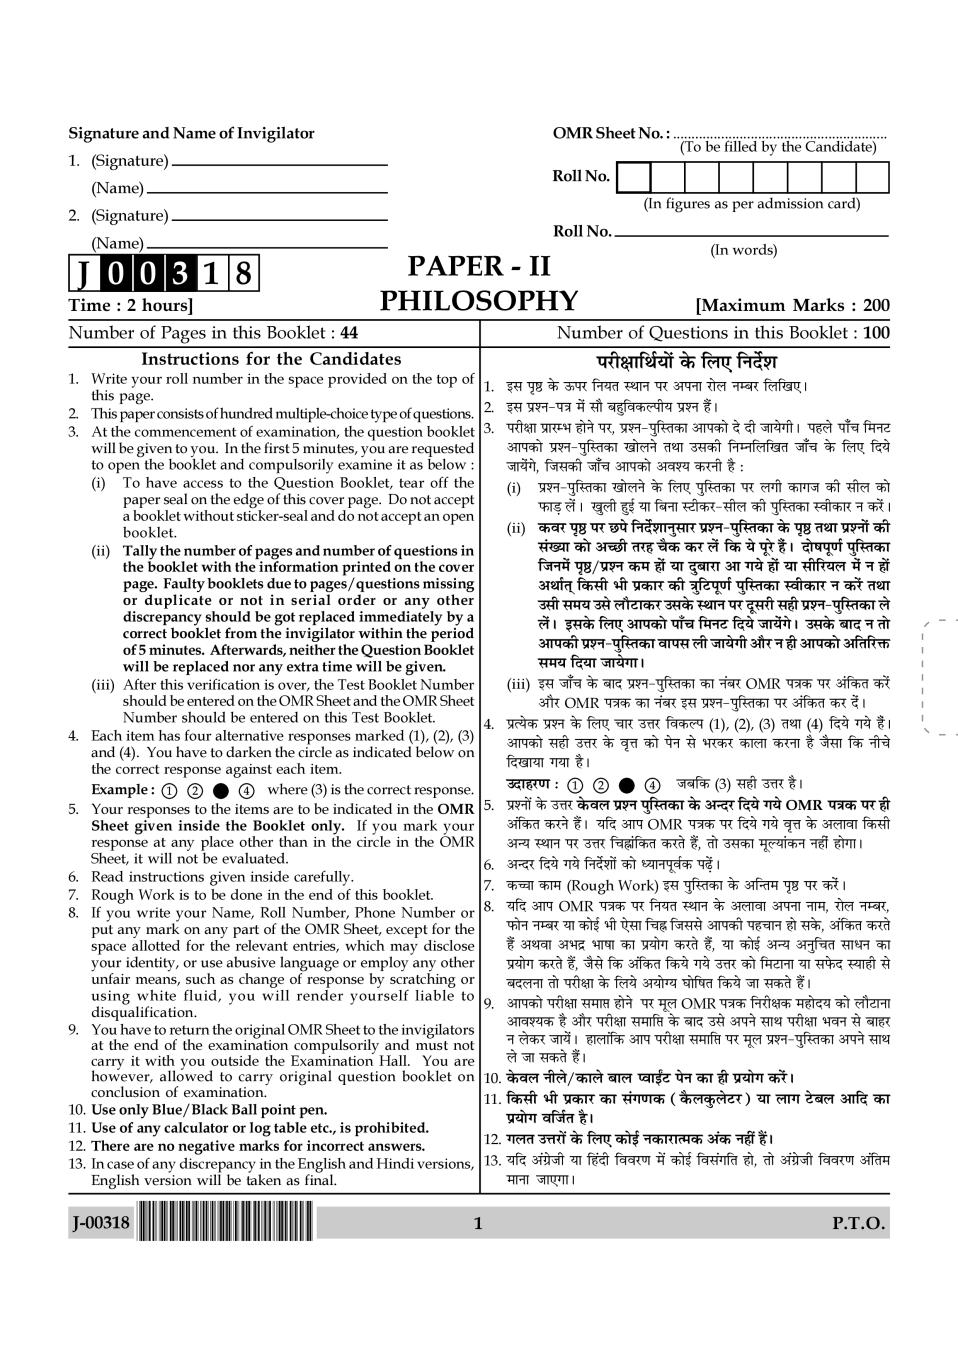 UGC NET Philosophy Question Paper 2018 - Page 1